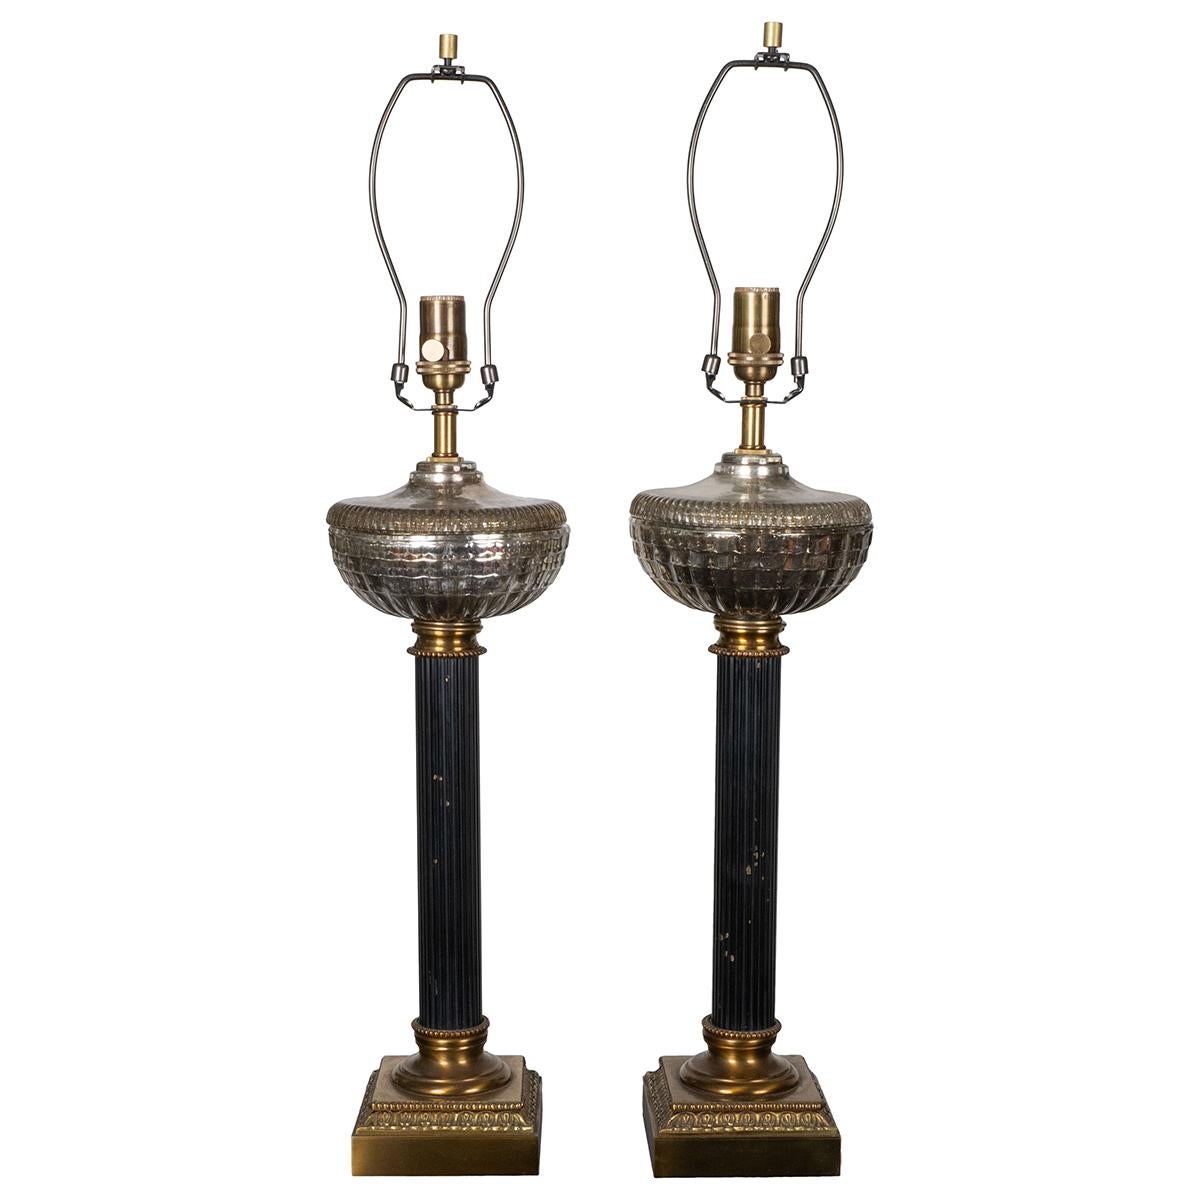 Pair of enameled metal and brass neo-classical columnar table lamps featuring cast mercury glass elements.